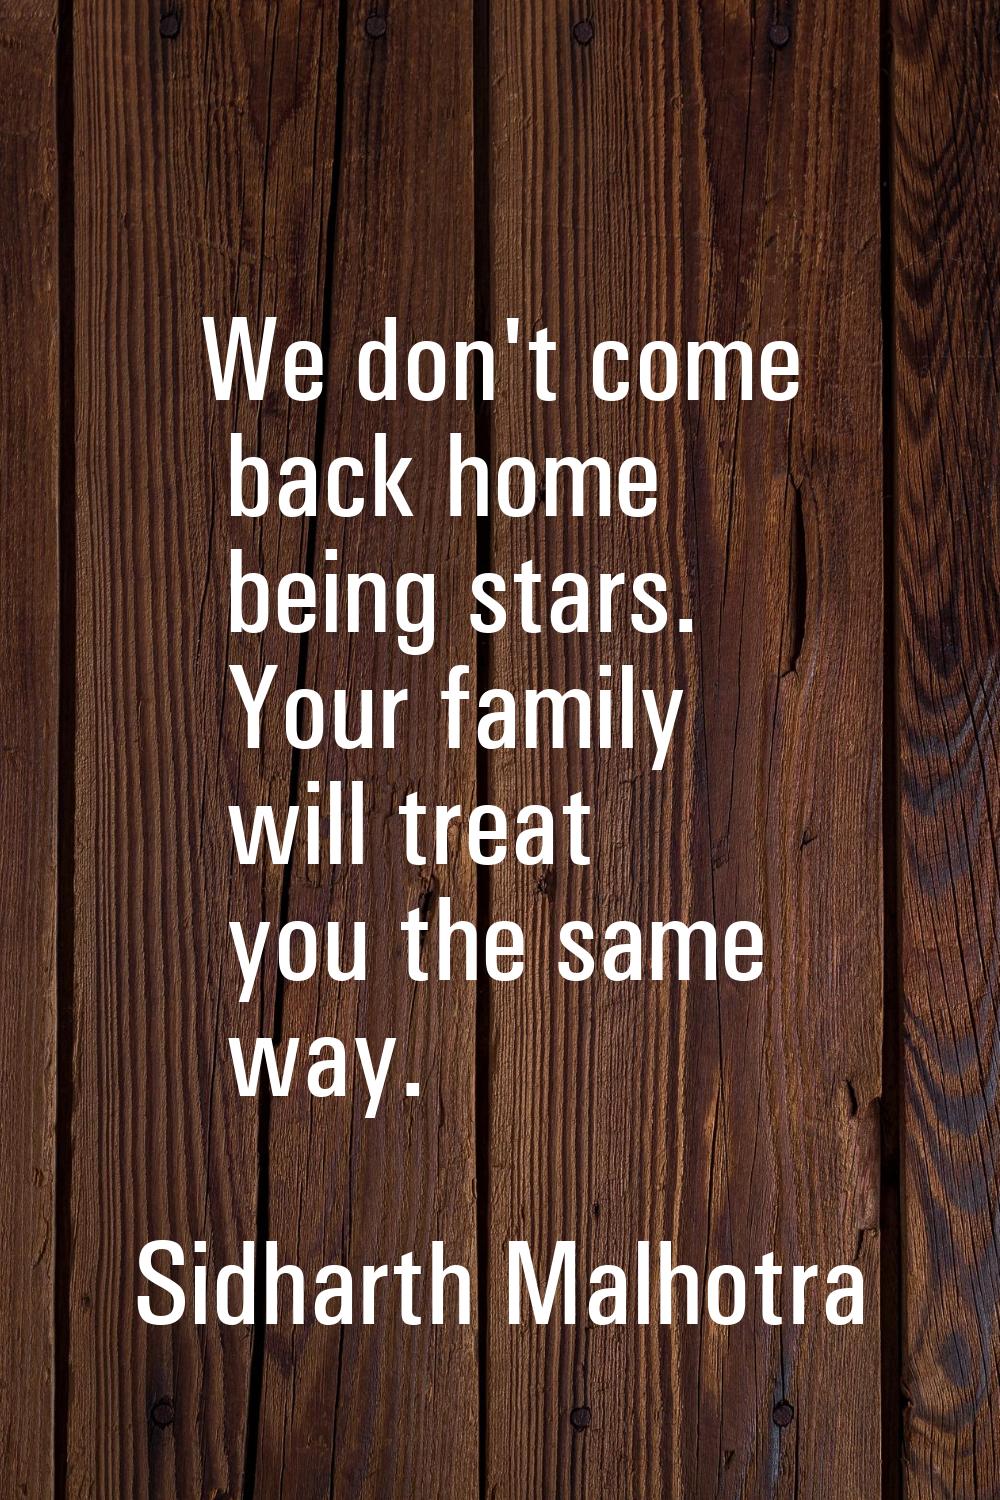 We don't come back home being stars. Your family will treat you the same way.